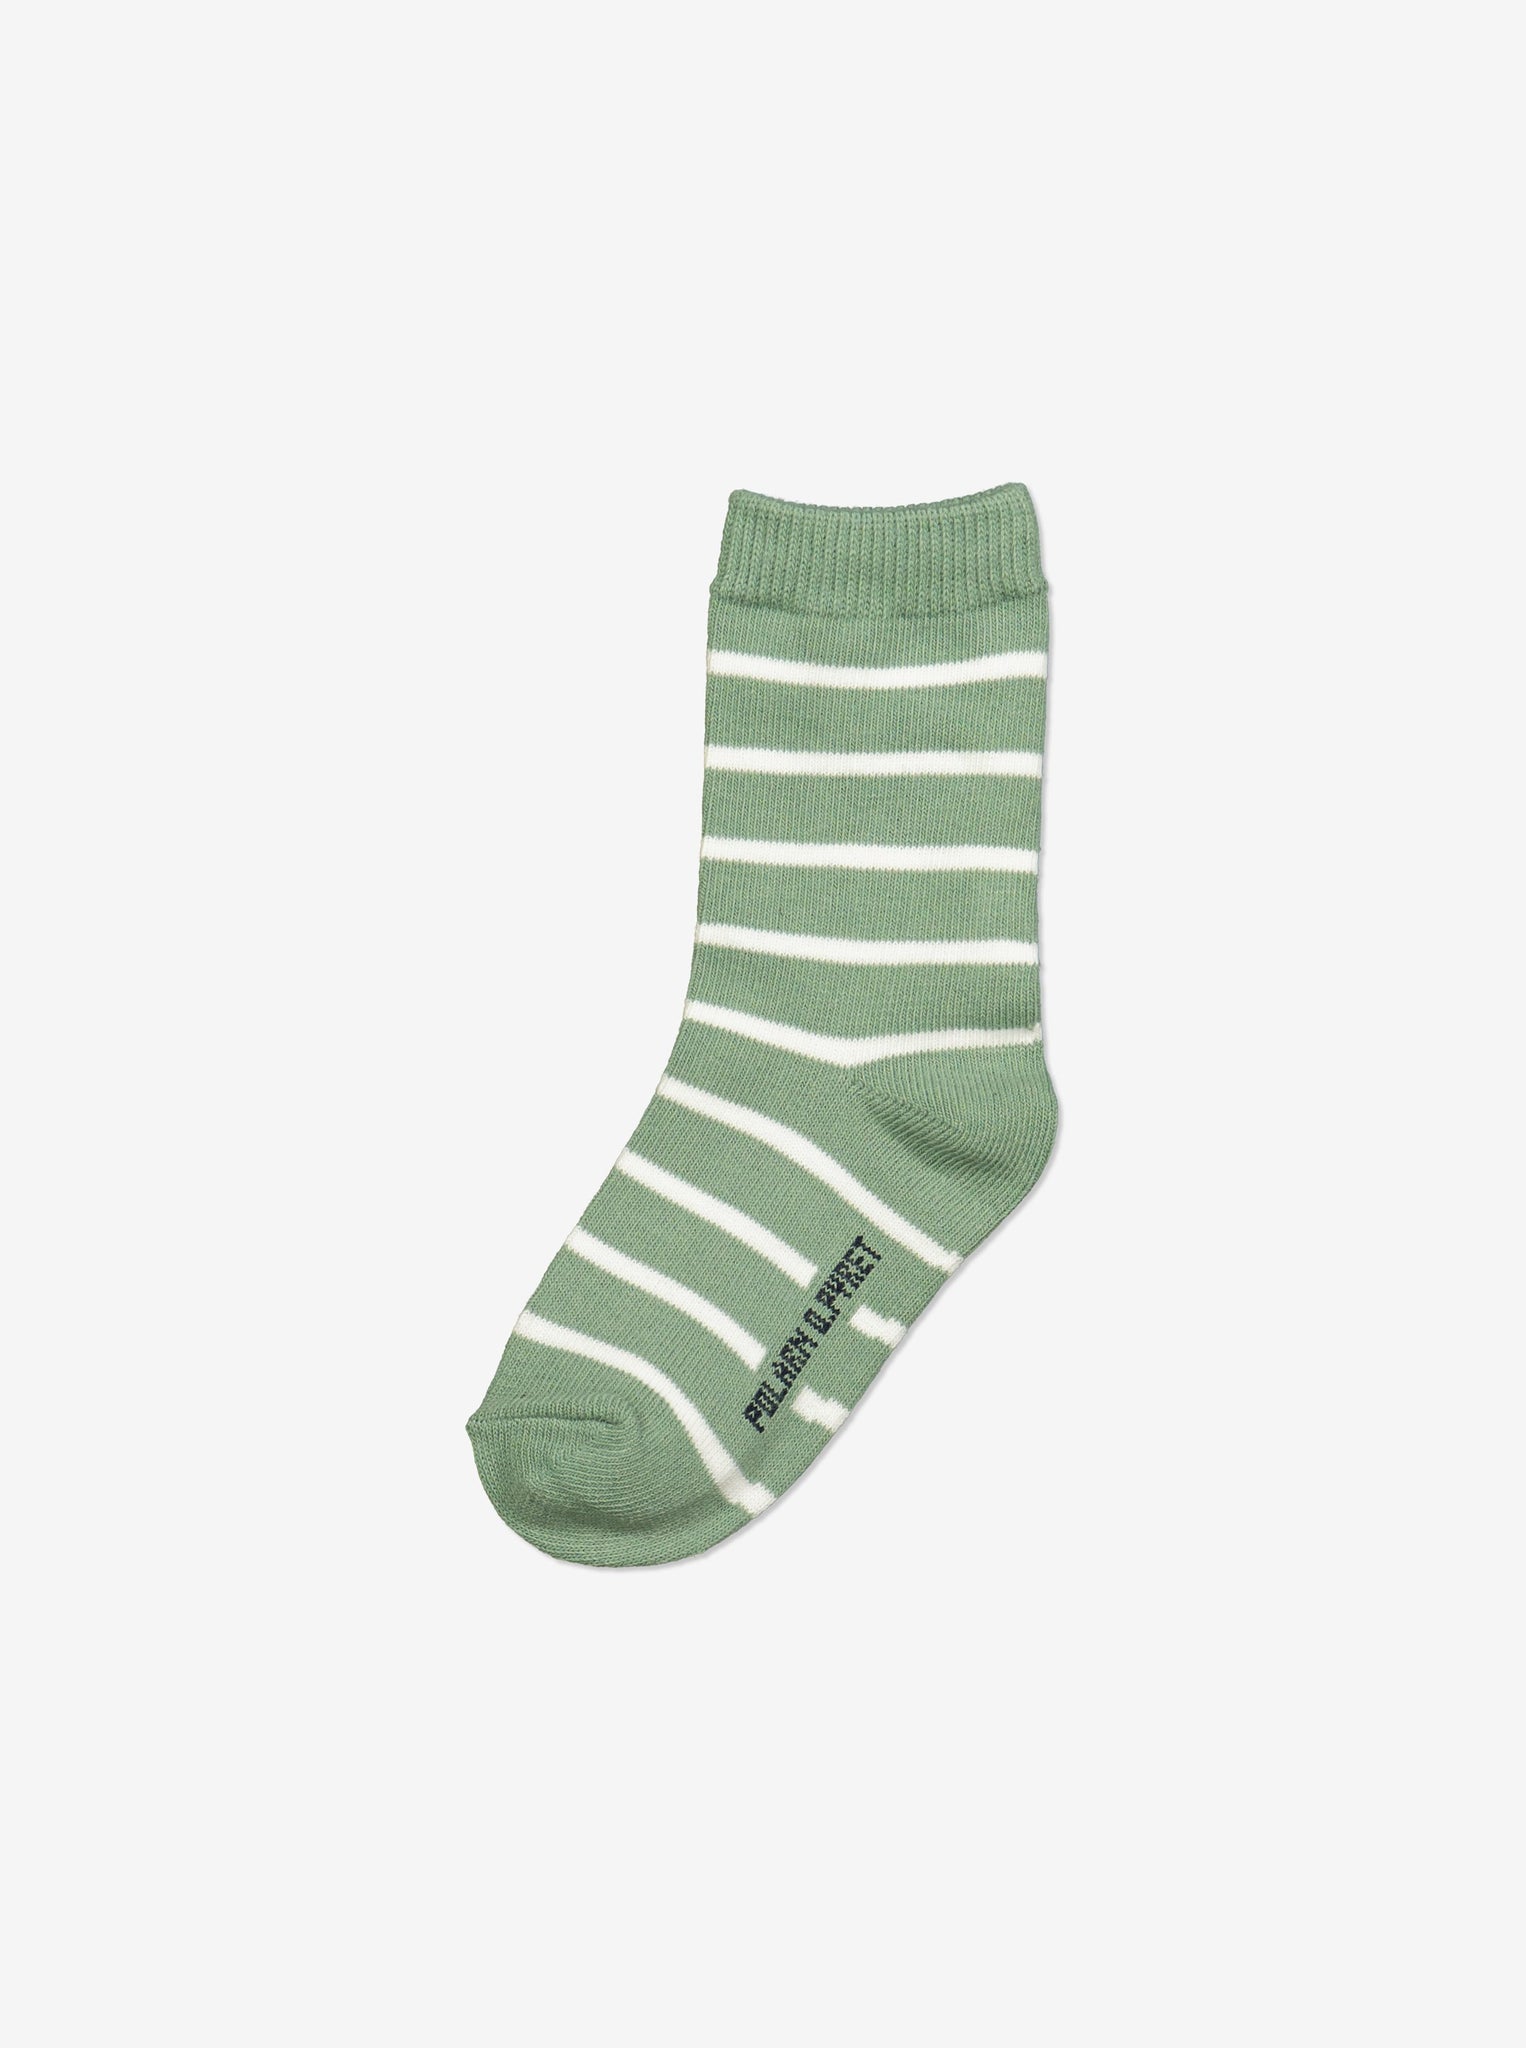  Organic Green Kids Socks Multipack from Polarn O. Pyret Kidswear. Made from environmentally friendly materials.